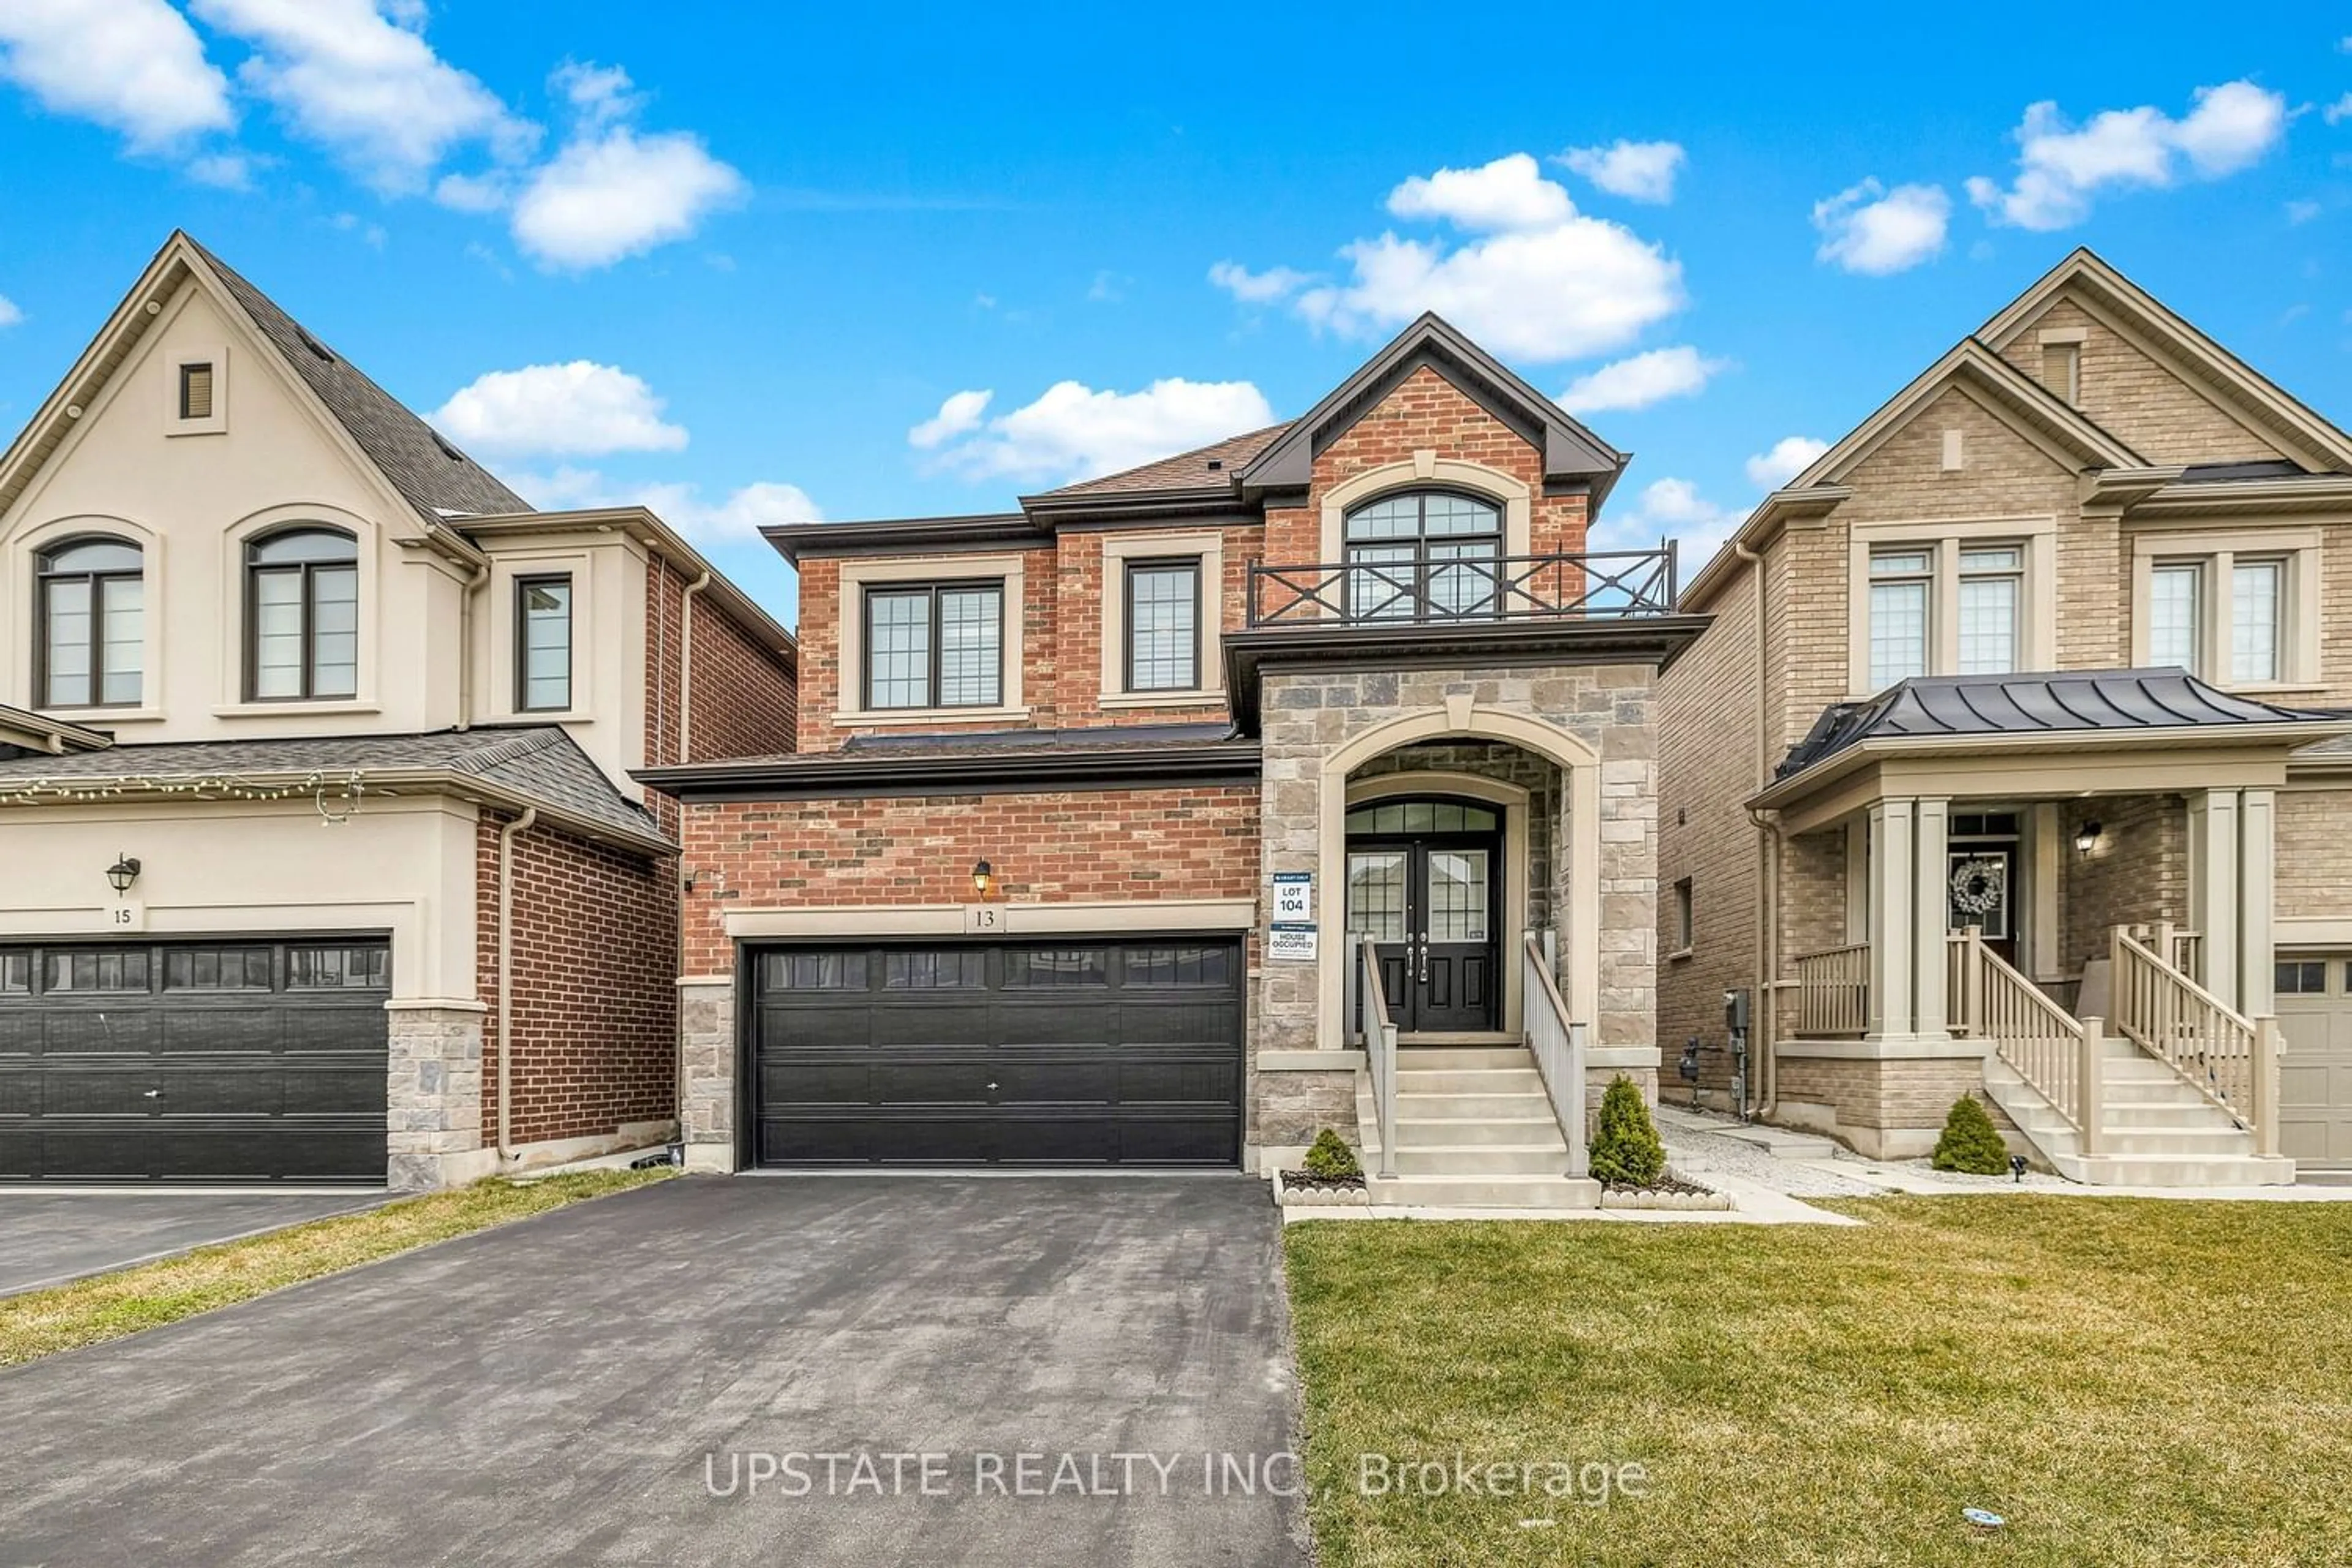 Home with brick exterior material for 13 Vineyard Dr, Brampton Ontario L6Y 2A5